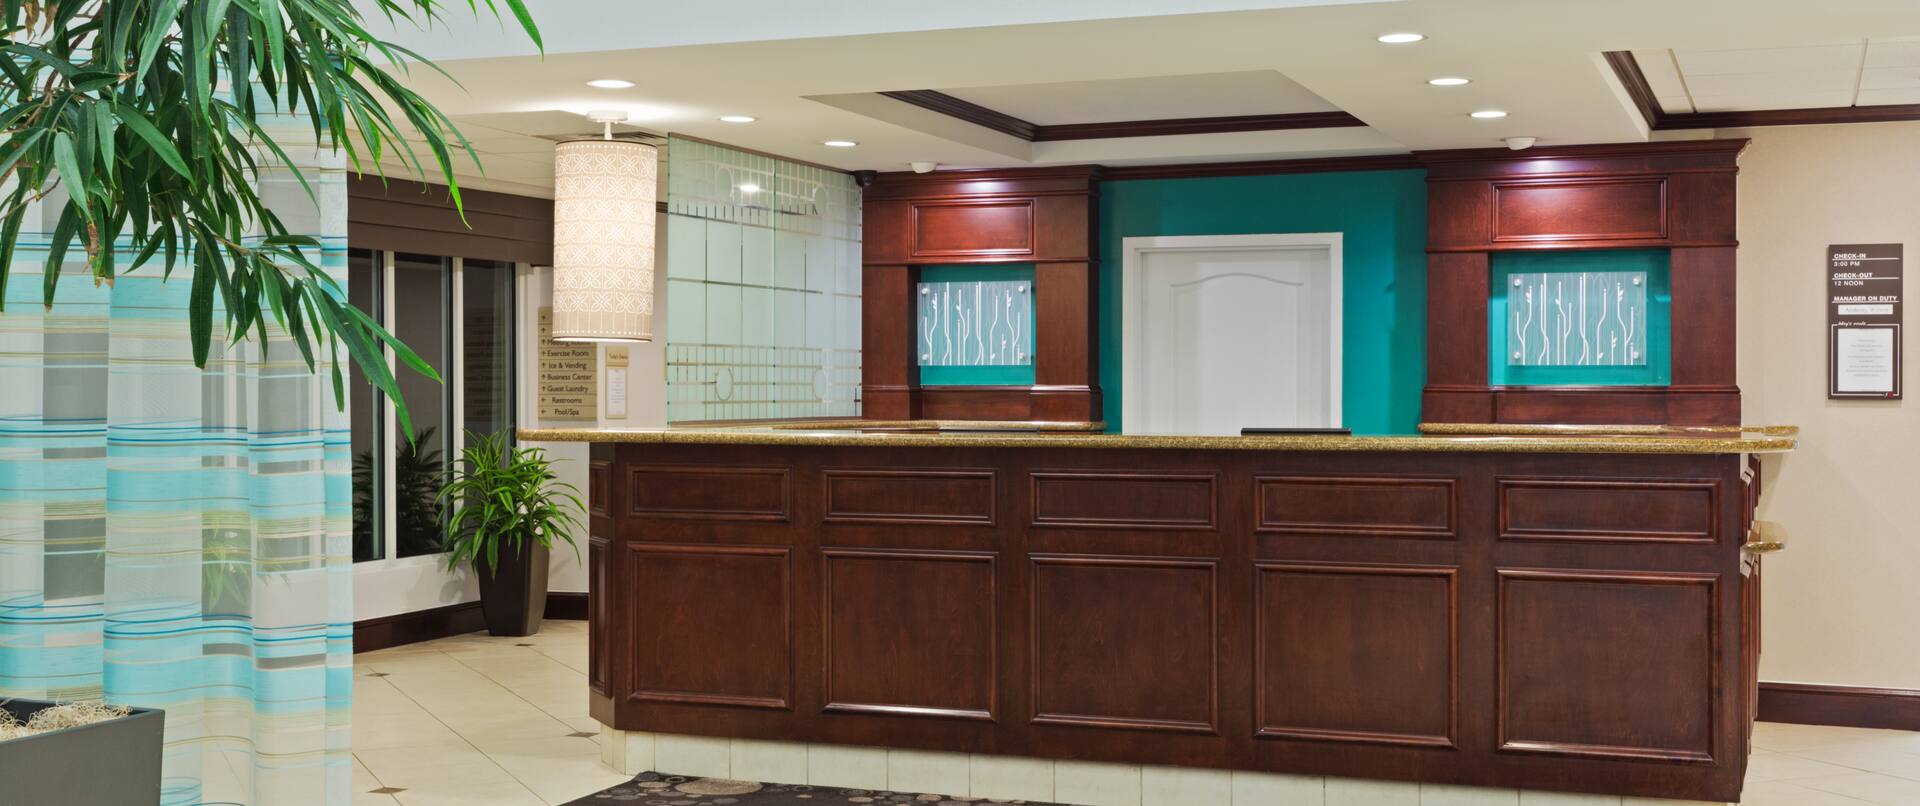 Front Desk and lobby area